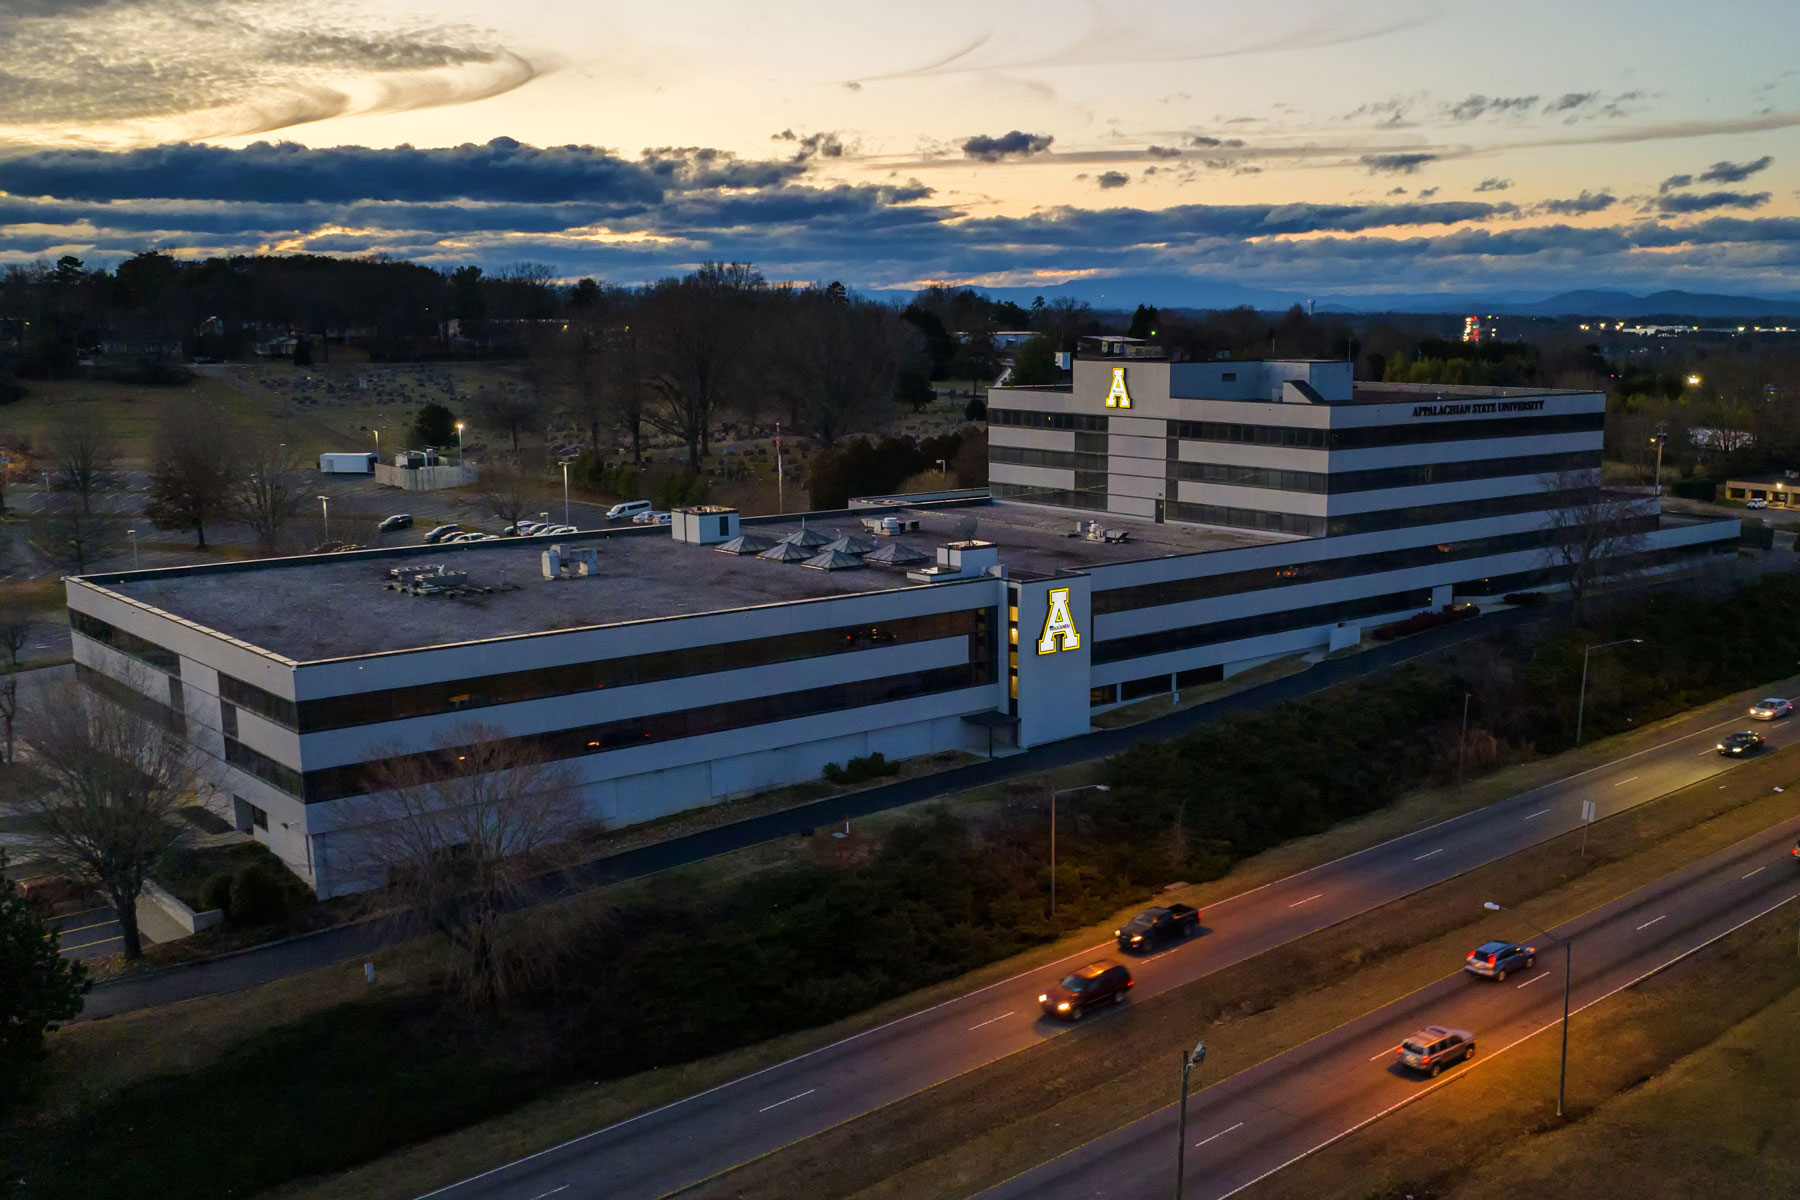 An evening view of App State’s Hickory campus